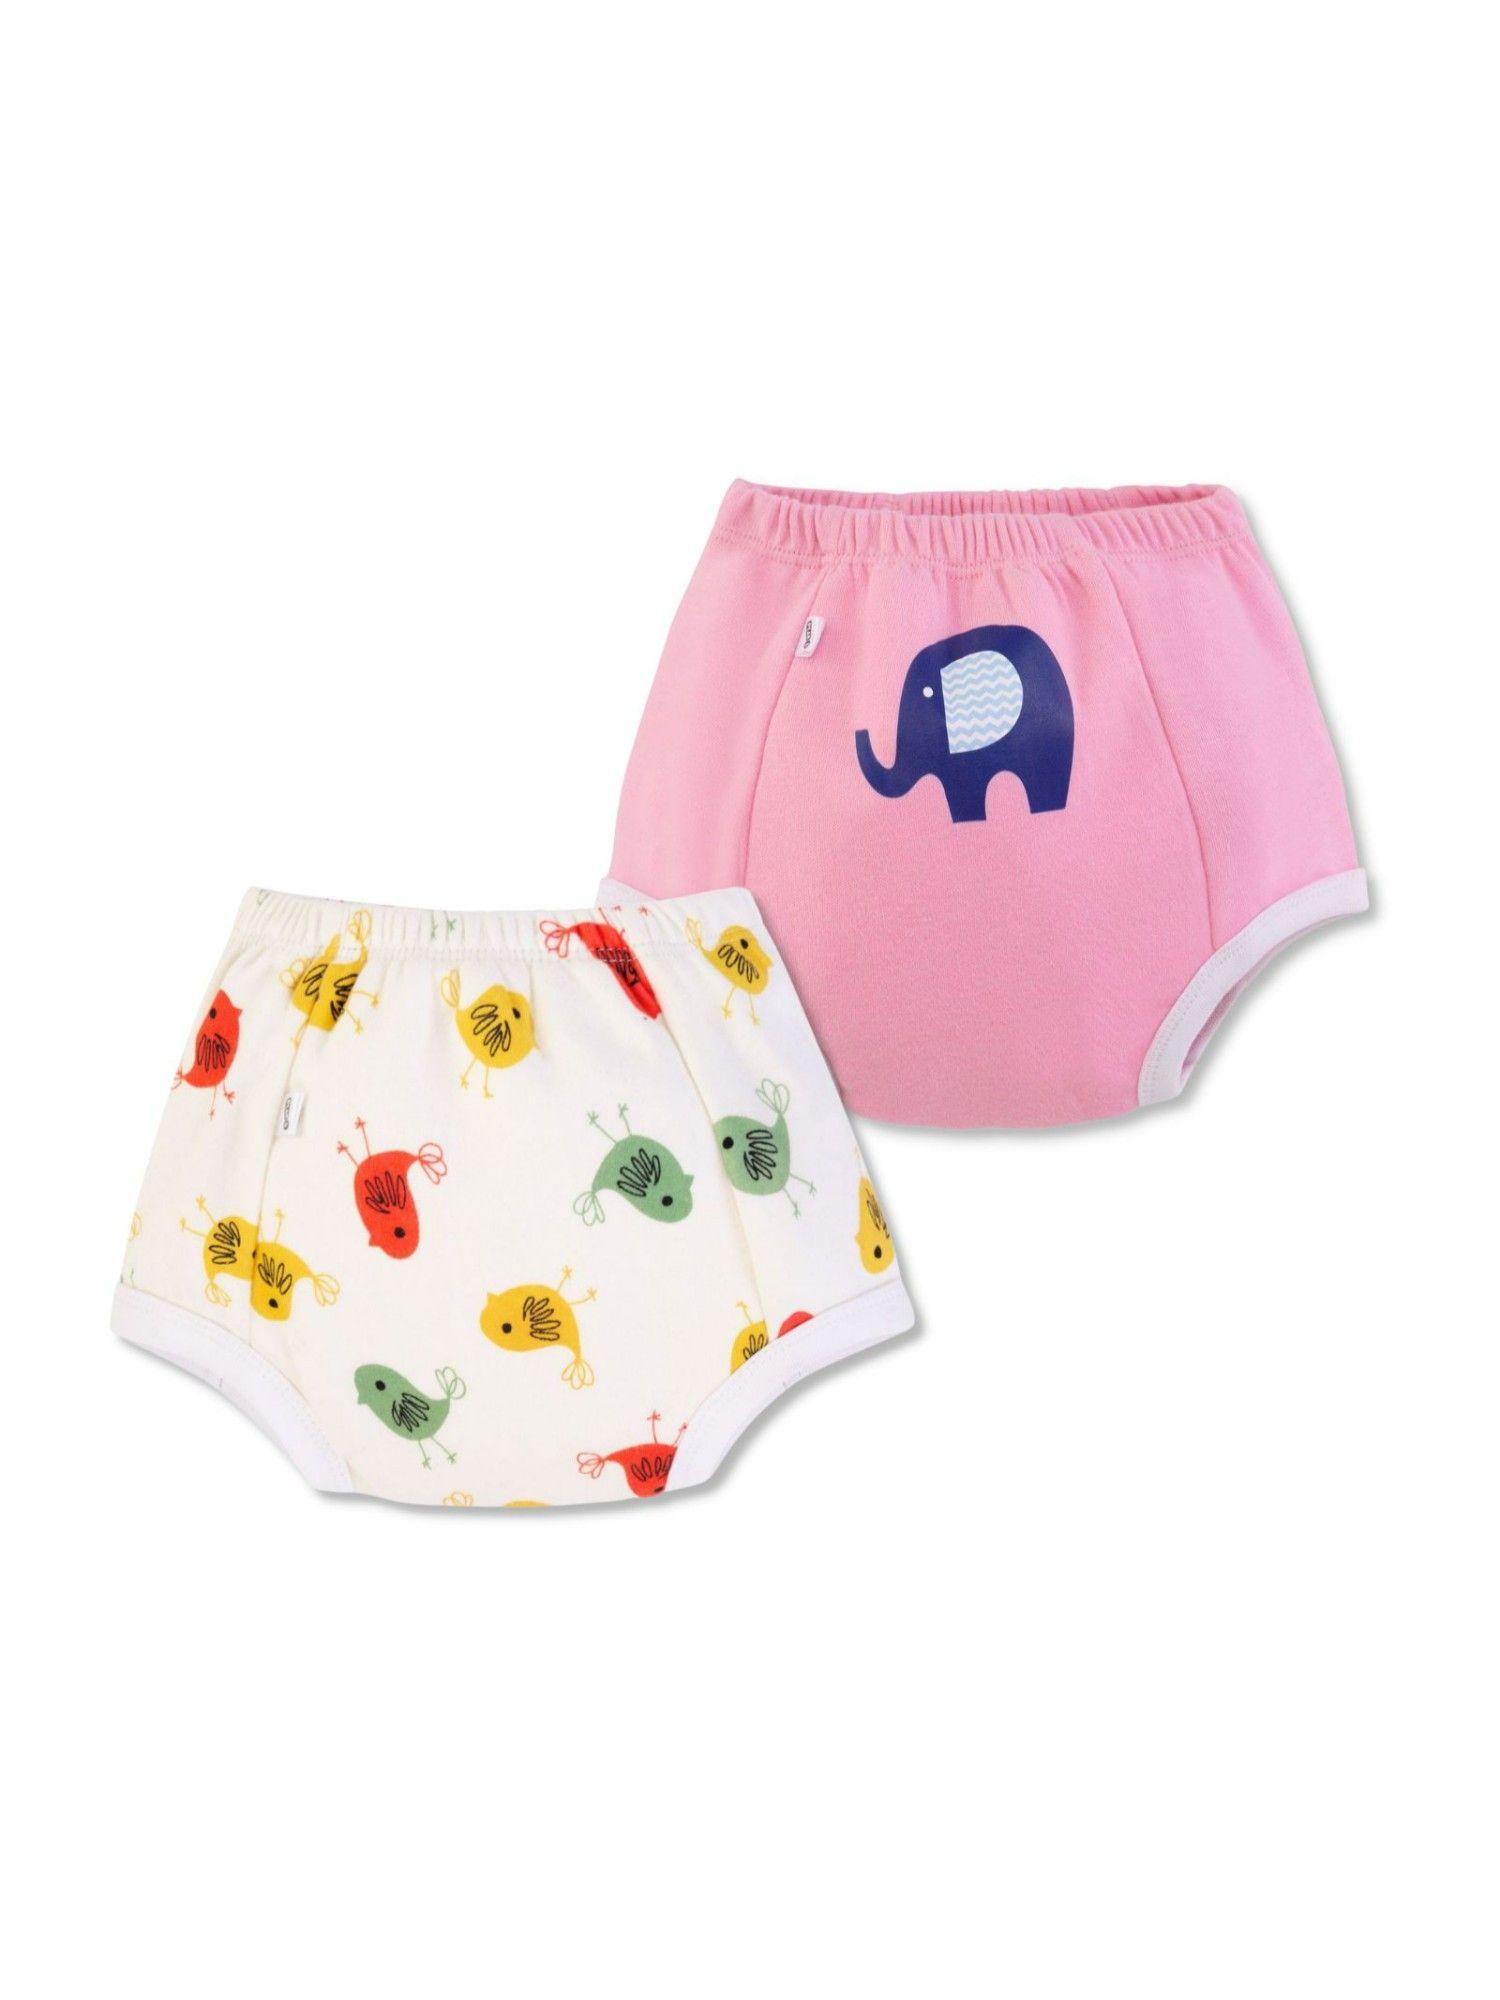 padded underwear for potty training big short (pack of 2)